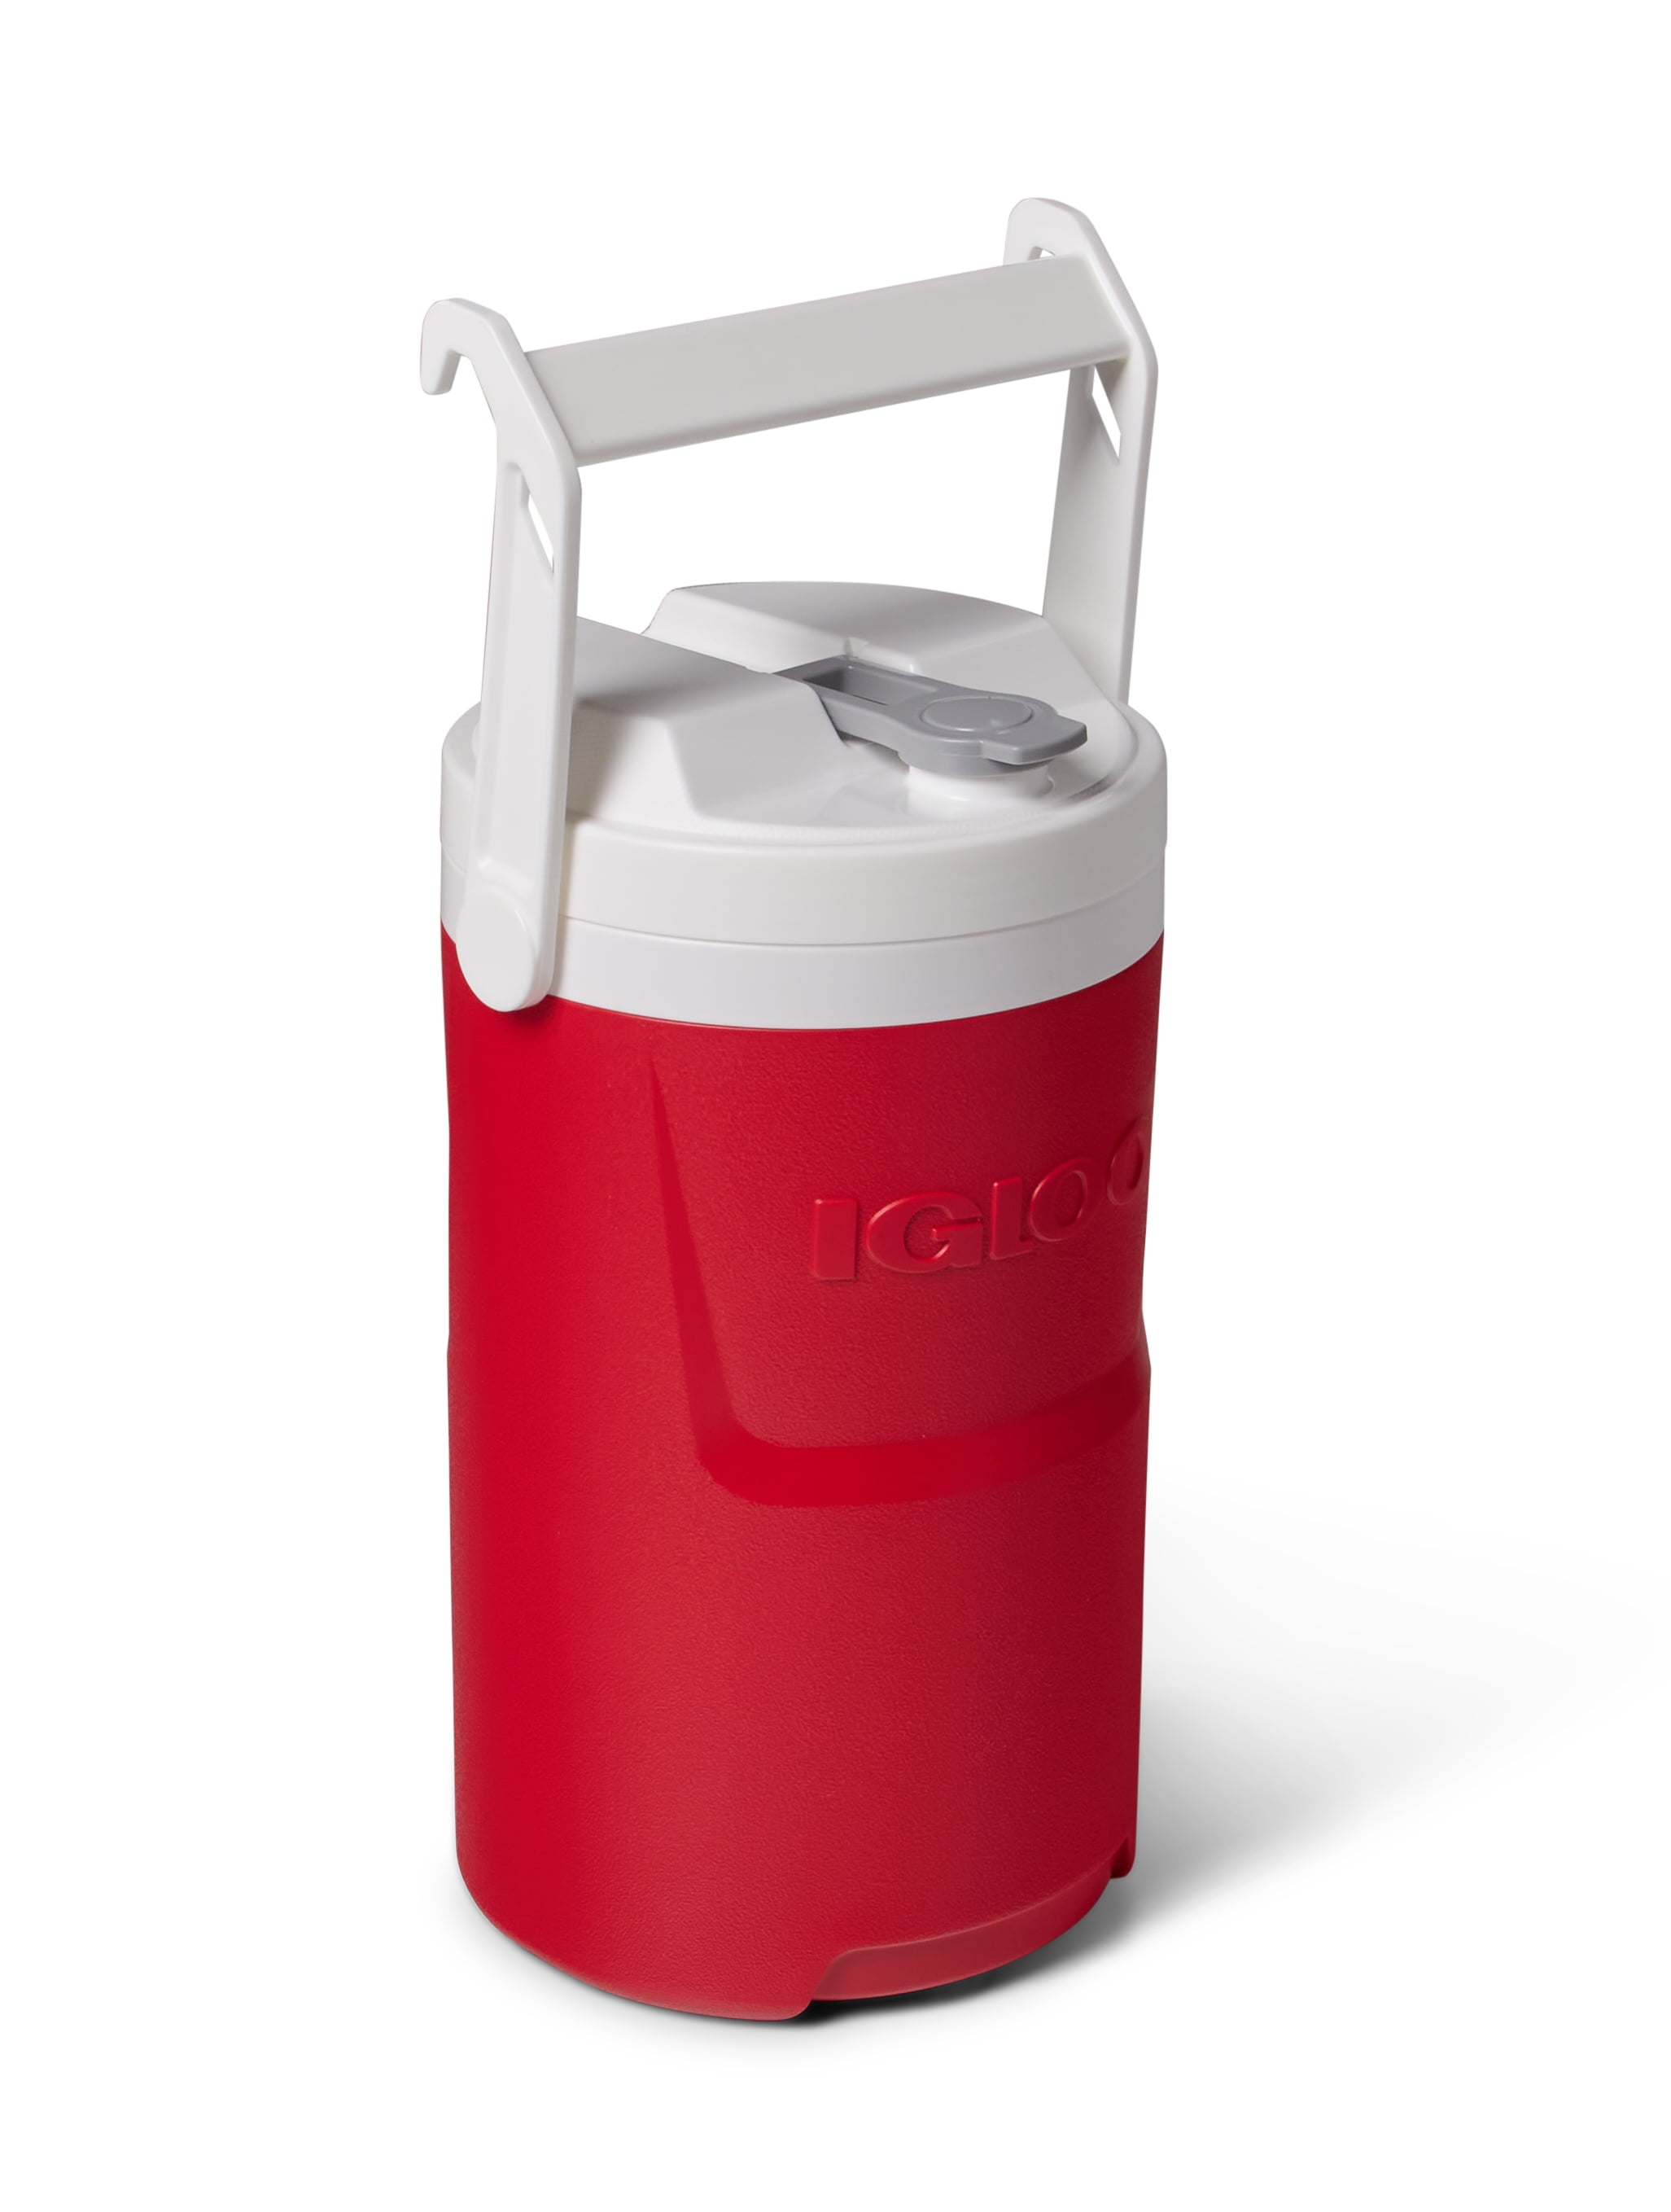 Igloo 1/2- Gallon Sport Beverage Jug with Hooks - Red